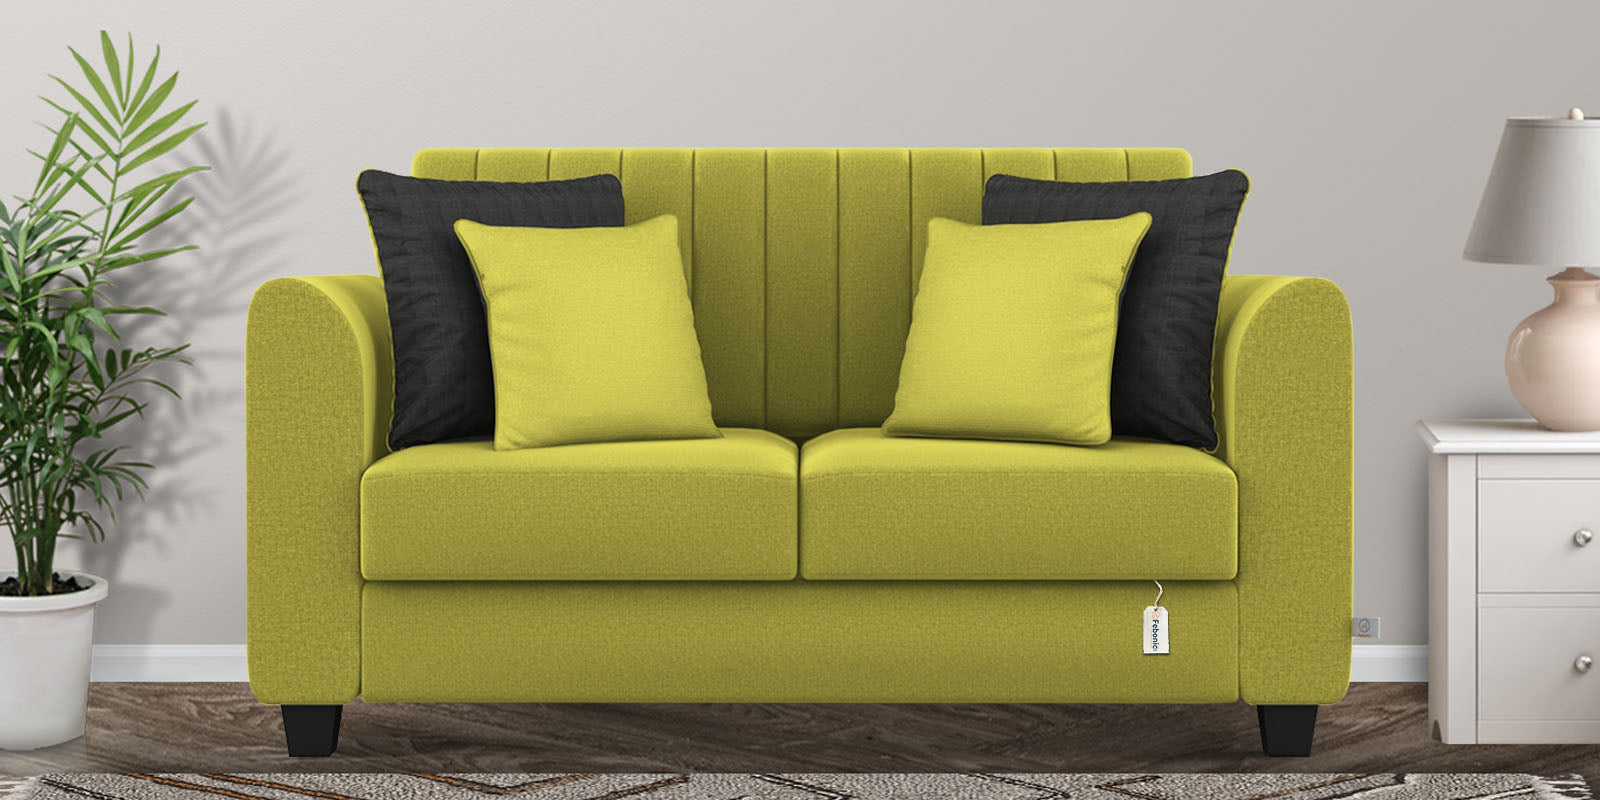 Cosmic Fabric 2 Seater Sofa in Parrot Green Colour